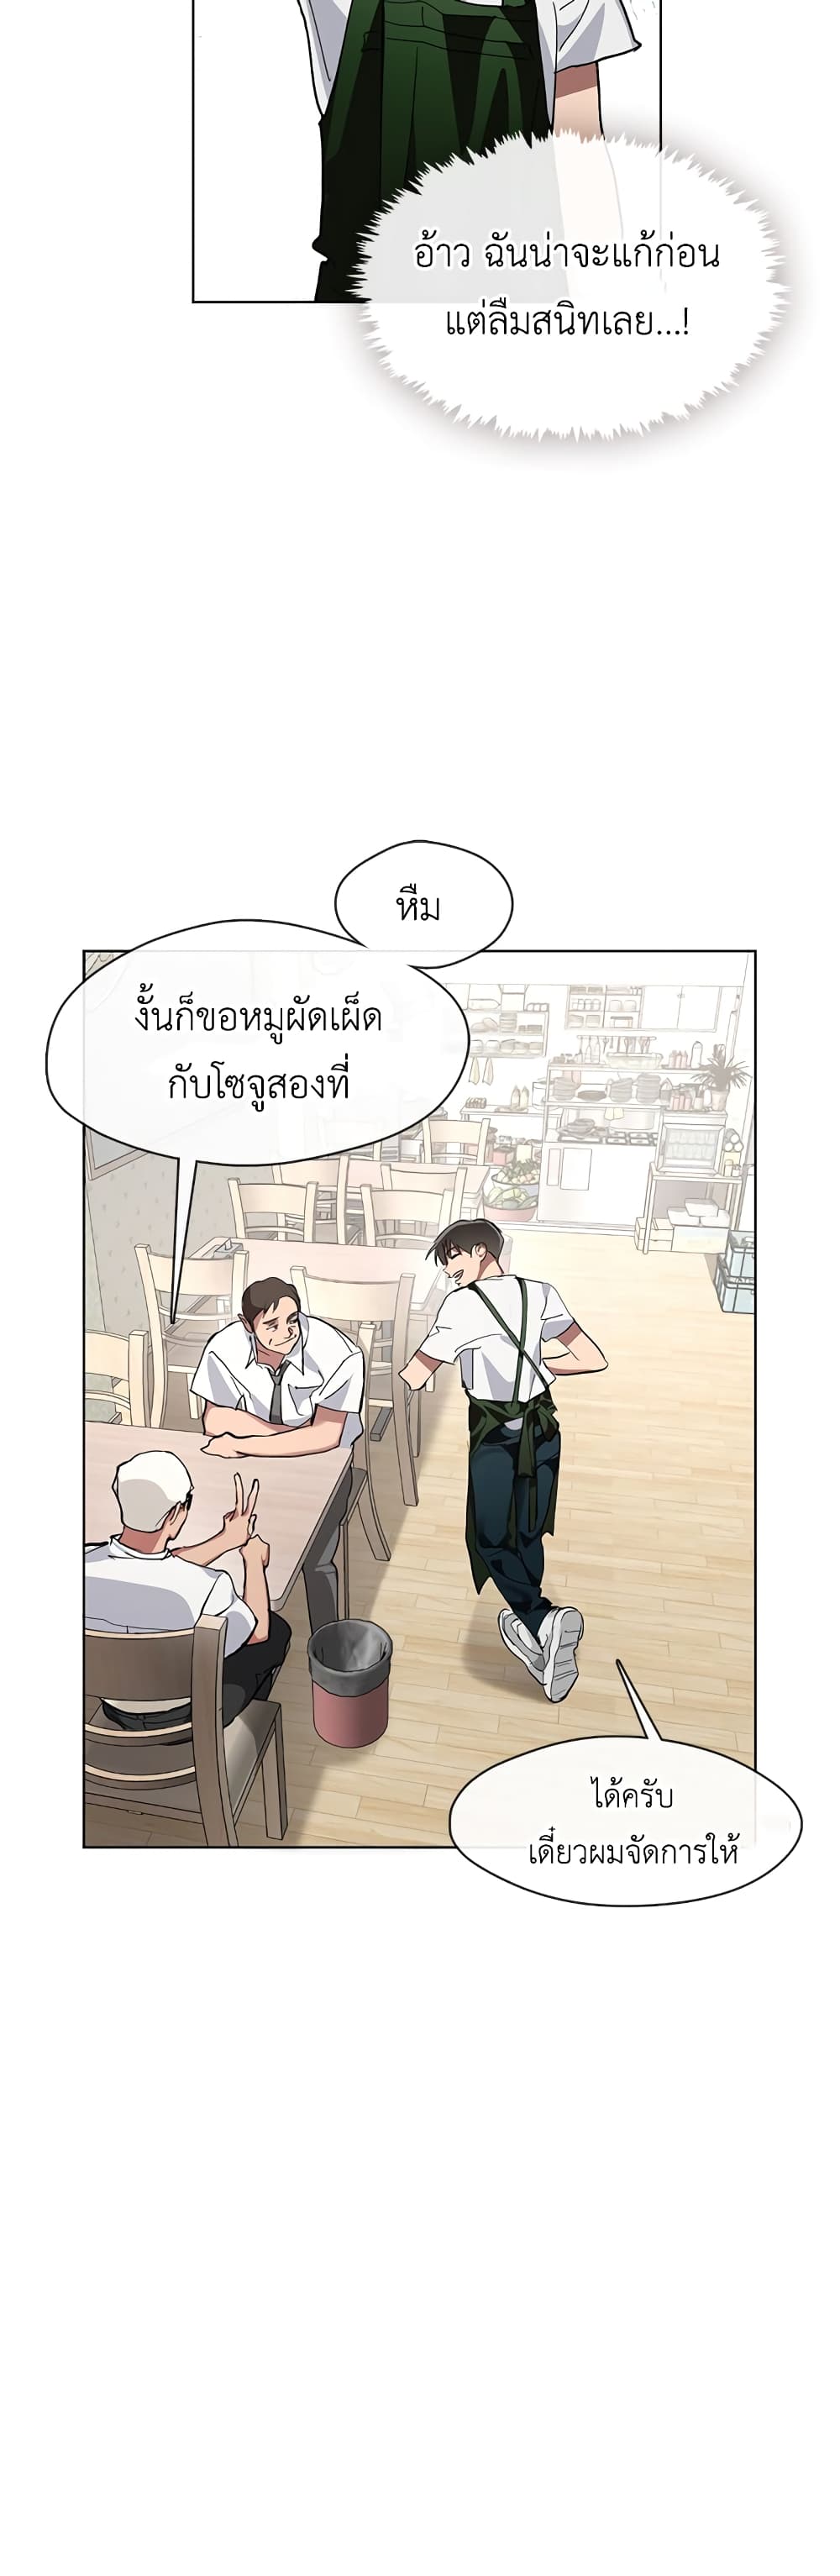 Restaurant in the After Life ตอนที่ 7 (27)